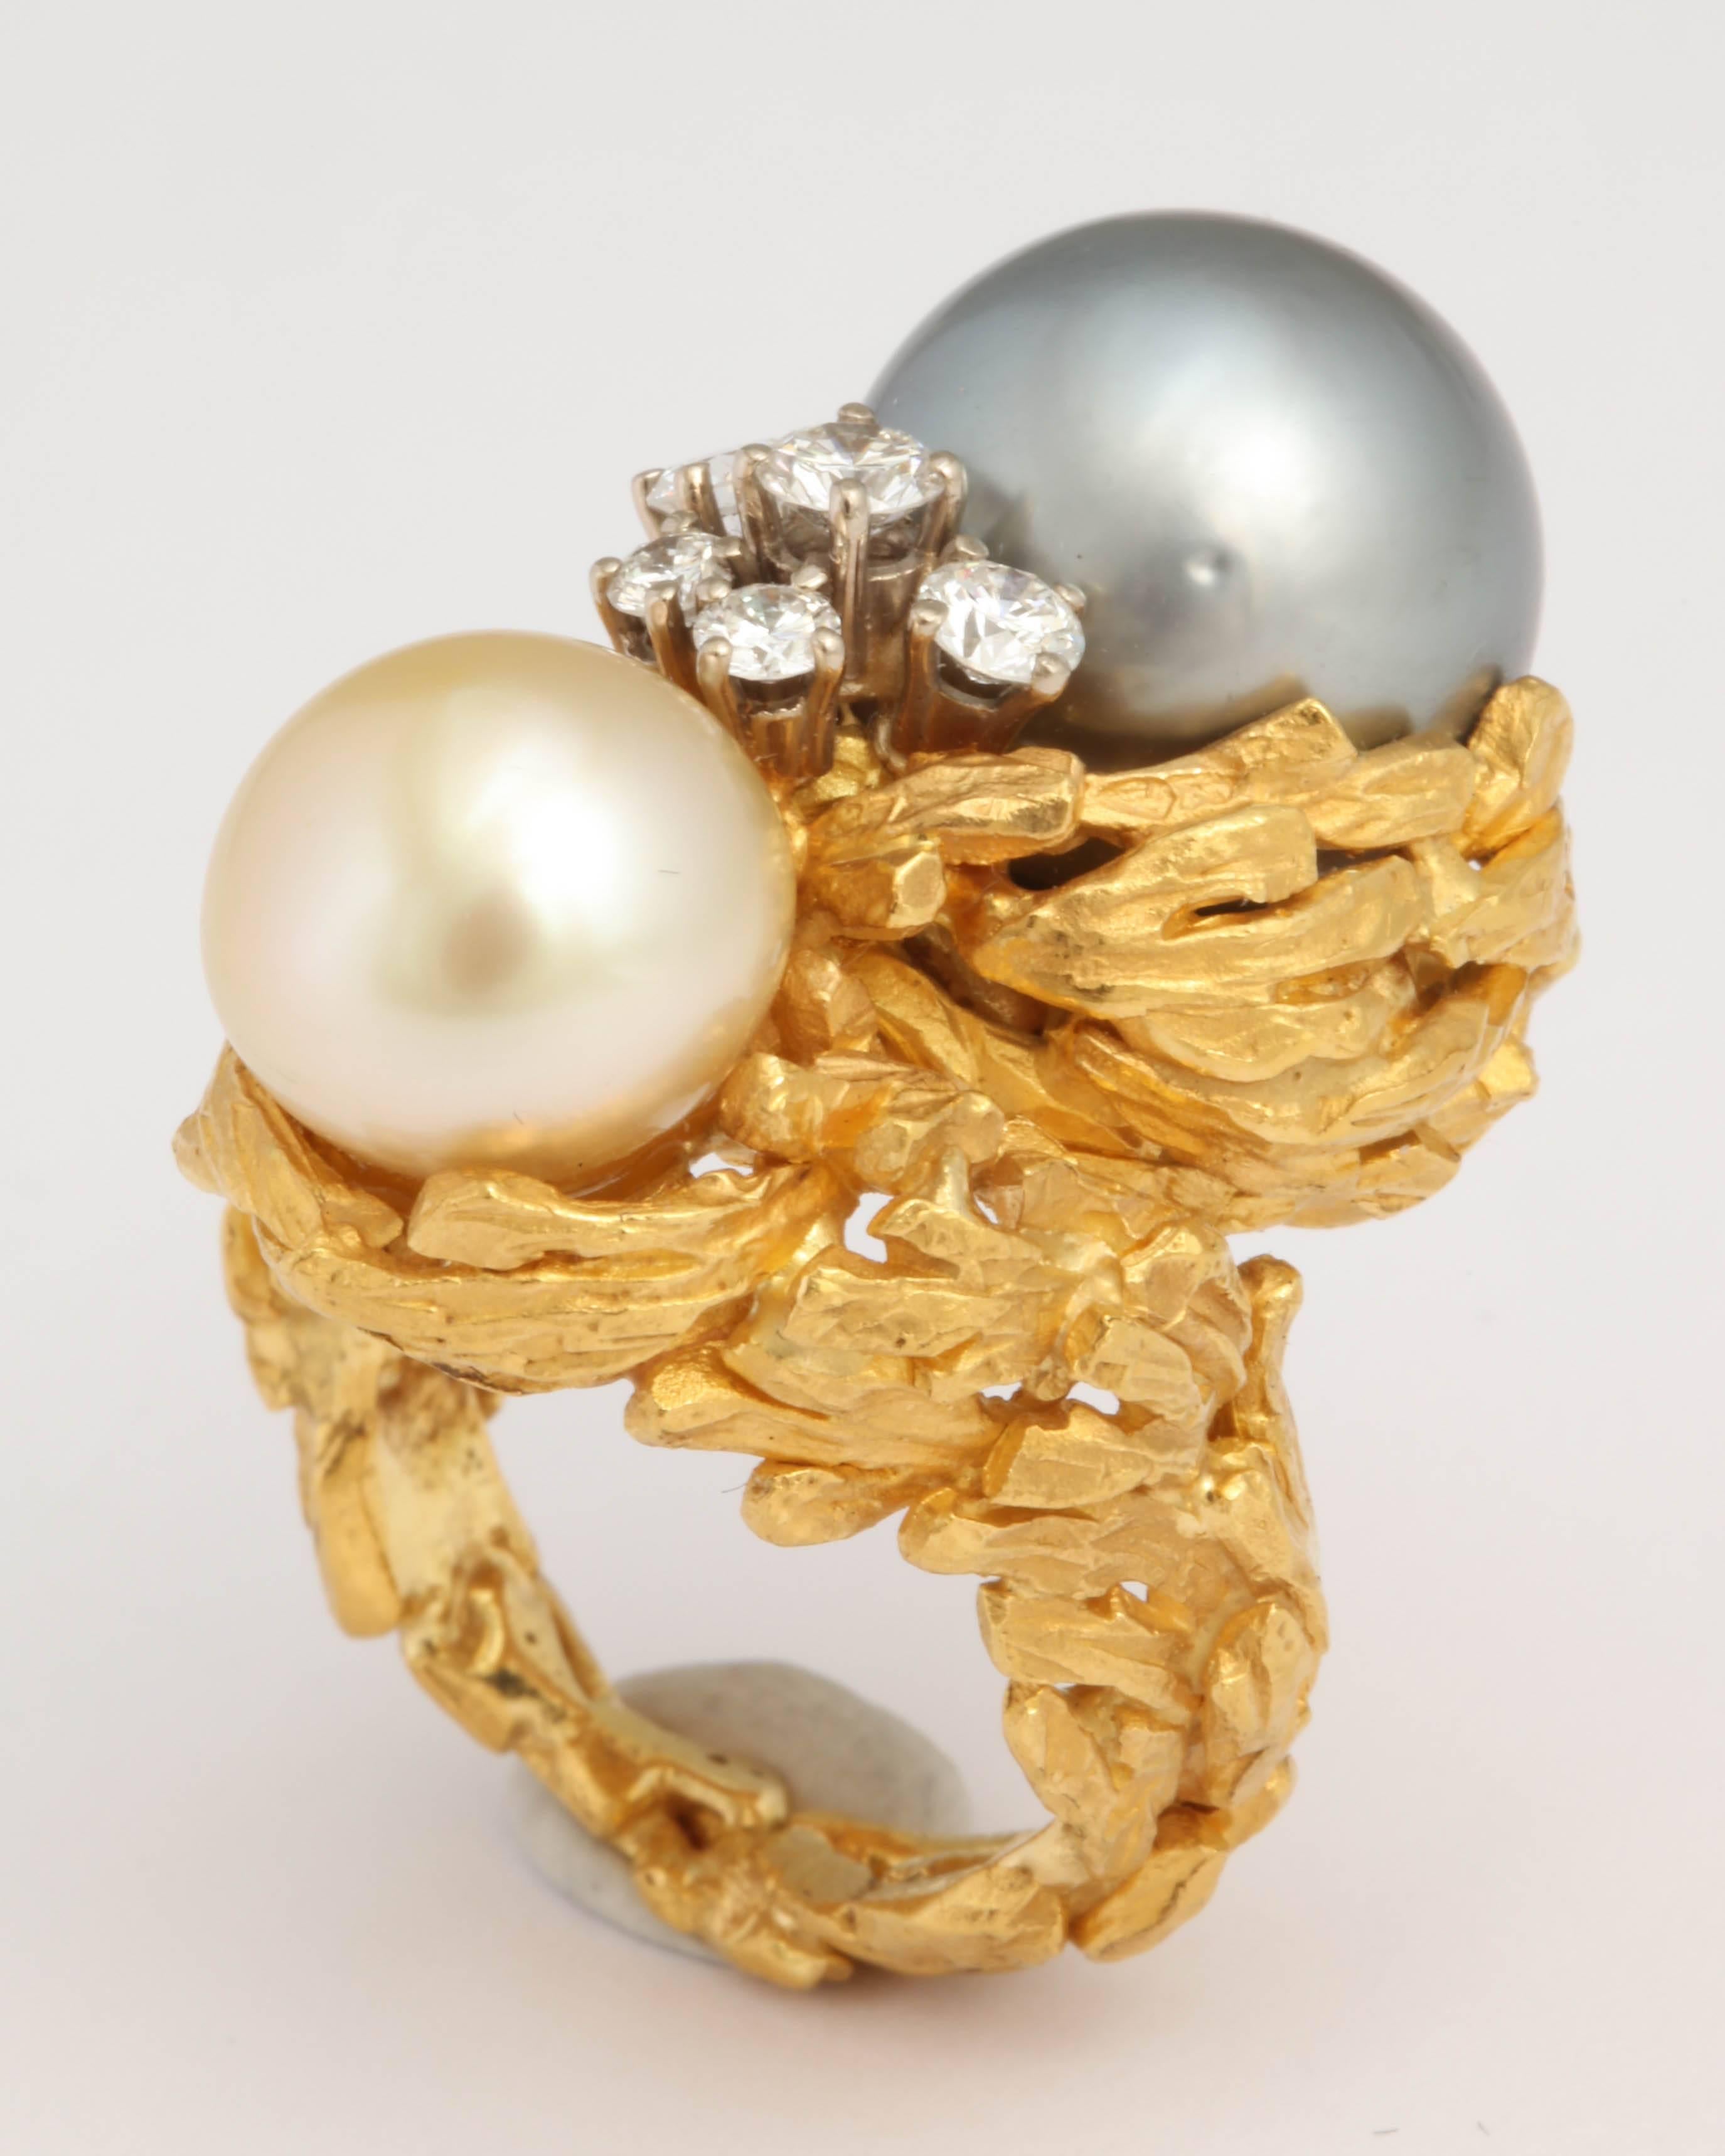 18kt Yellow Gold Double Pearl Ring - One Gray and measuring 13mm and one a creamy White measuring 10.5mm.  The Pearls are nestled in an engraved Foliate setting that encompasses the whole Ring.  Between the two Pearls are 5 prong set Diamonds, which